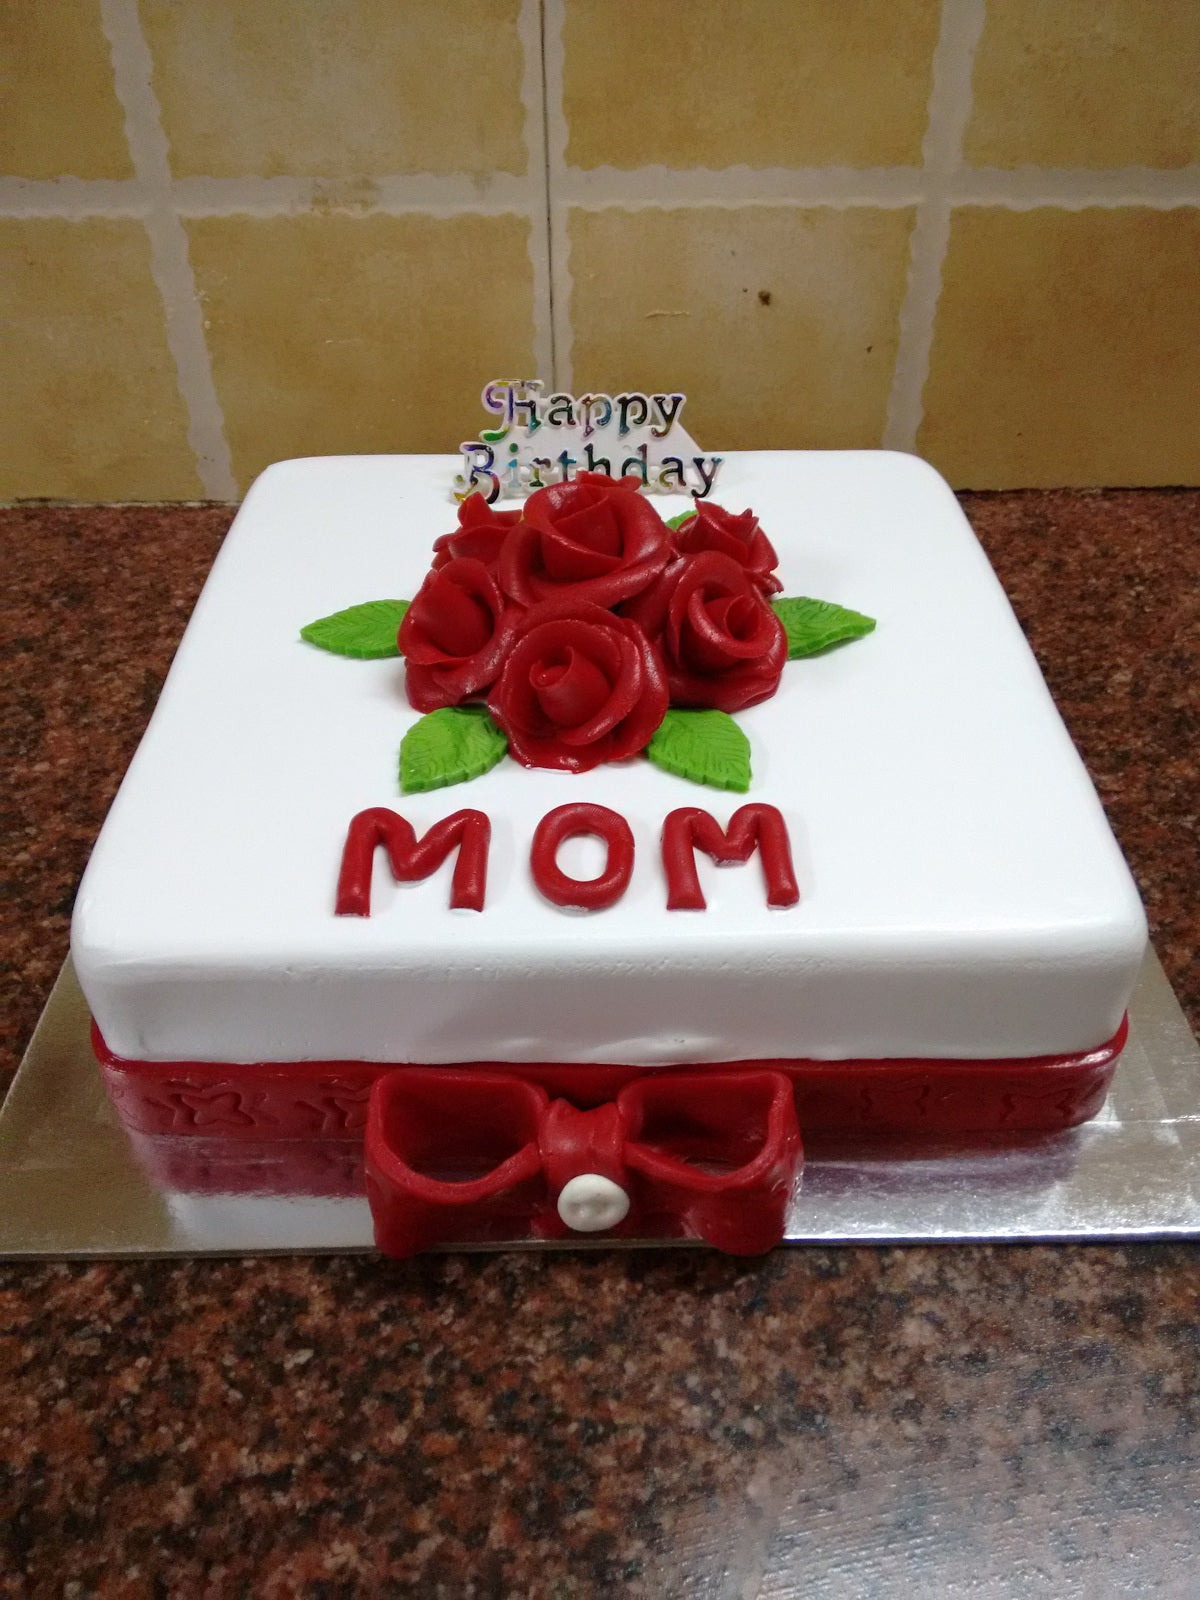 Happy Mother's Day Yummy Chocolate Cake 1 Kg : Gift/Send QFilter Gifts  Online HD1135351 |IGP.com